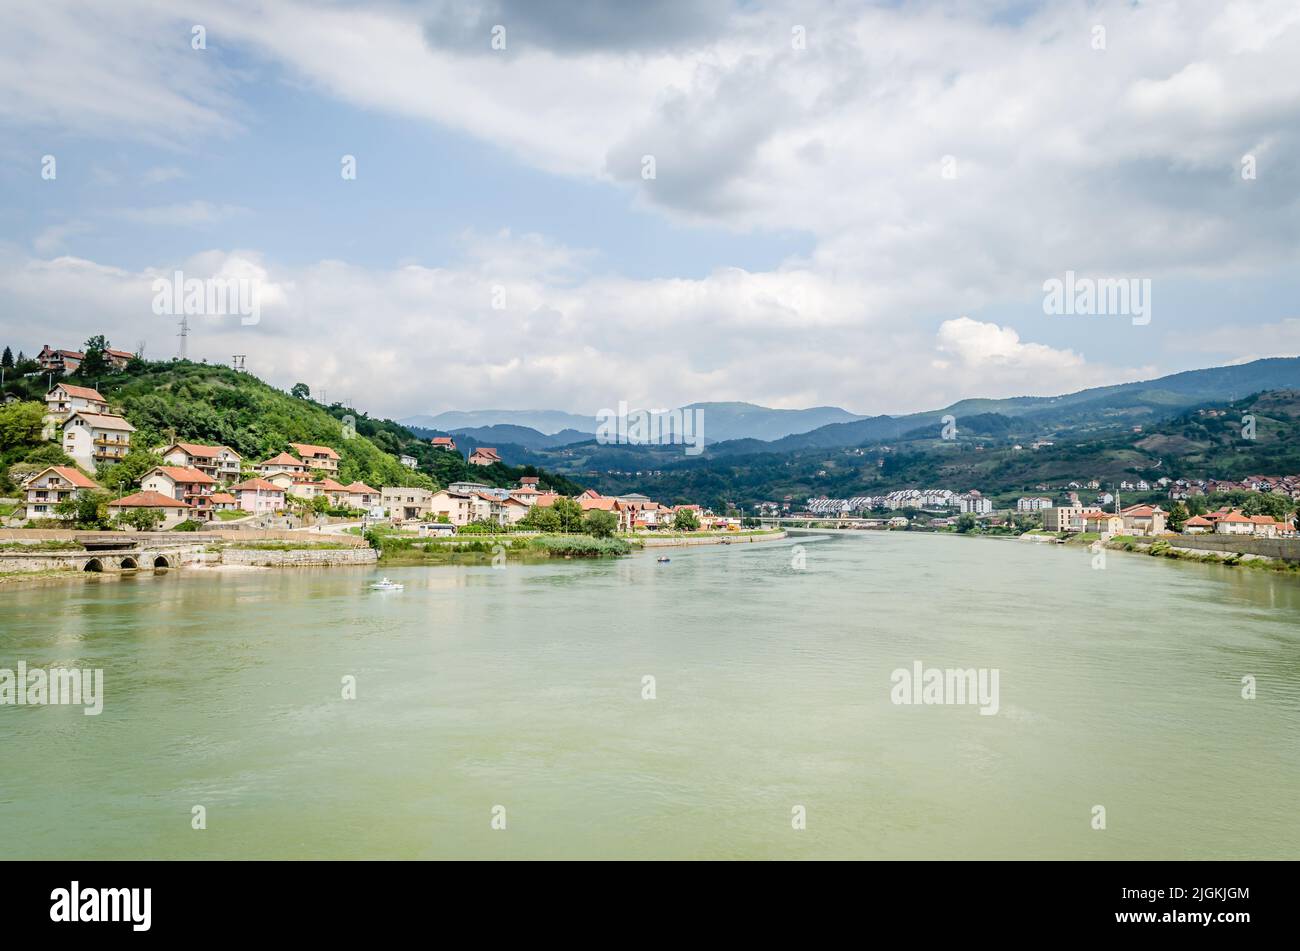 August 16, 2014. Visegrad, Sarajevo - Bosnia and Herzegovina. Bosnia and Herzegovina. Višegrad is a populated place located in the Drina river basin, Stock Photo